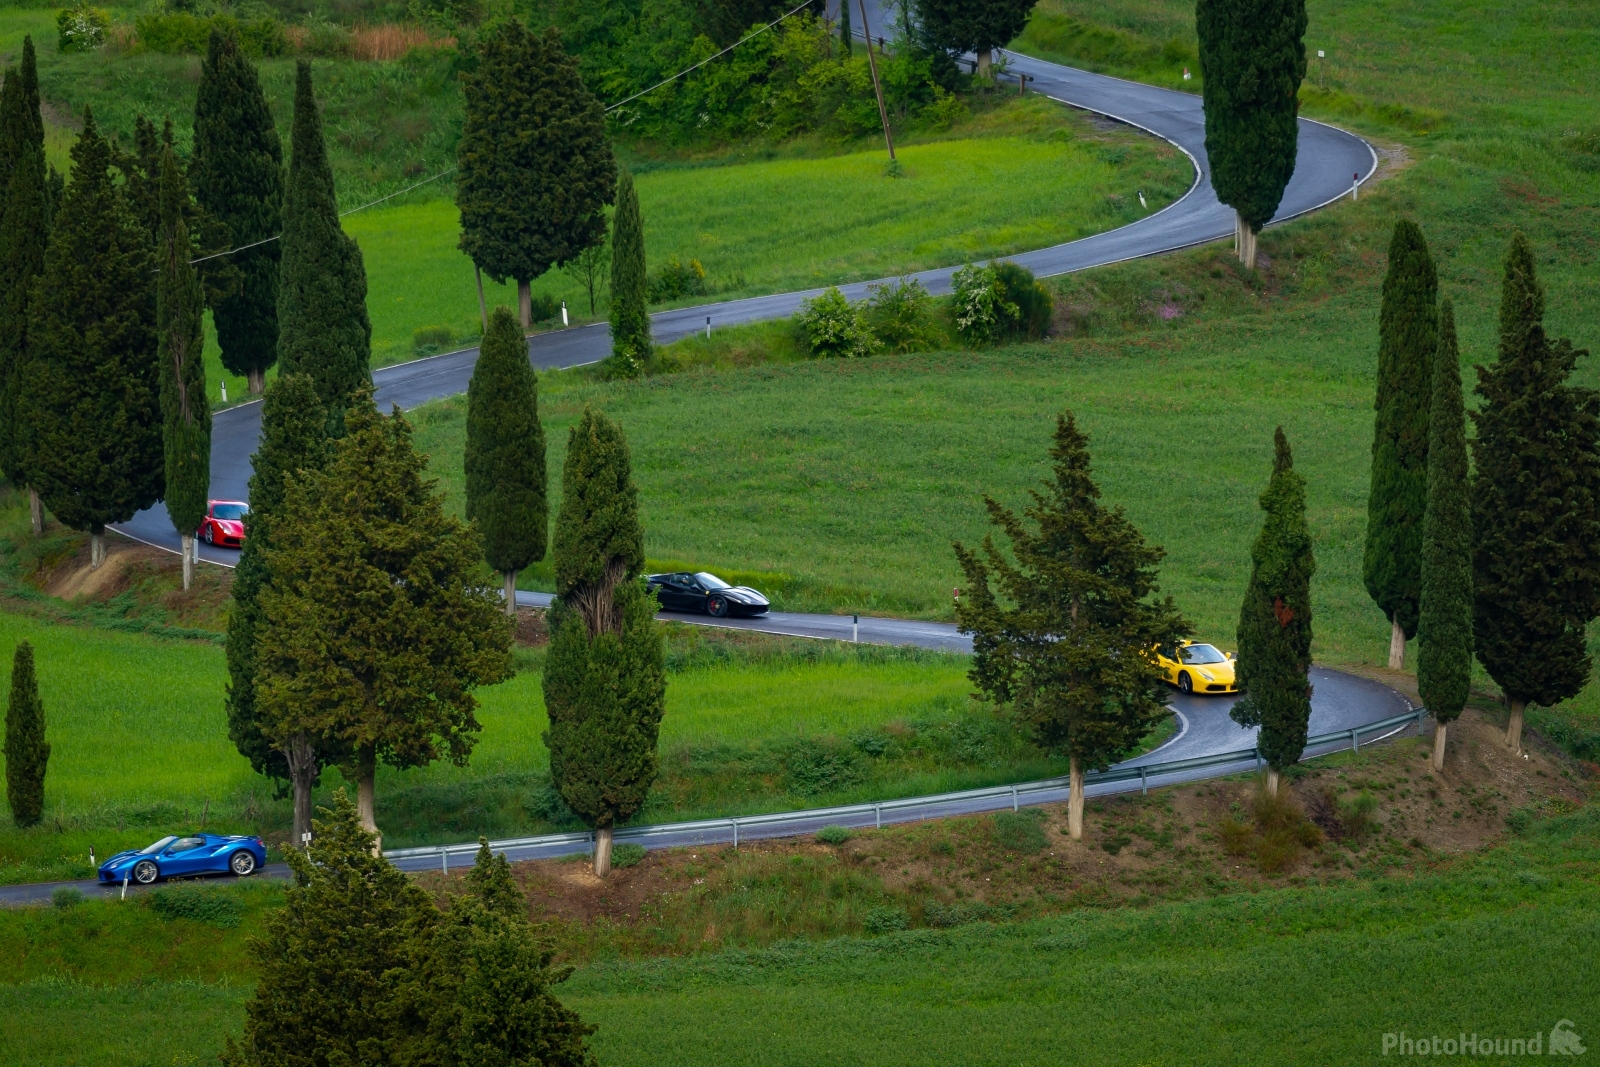 Image of Monticchiello winding road by VOJTa Herout